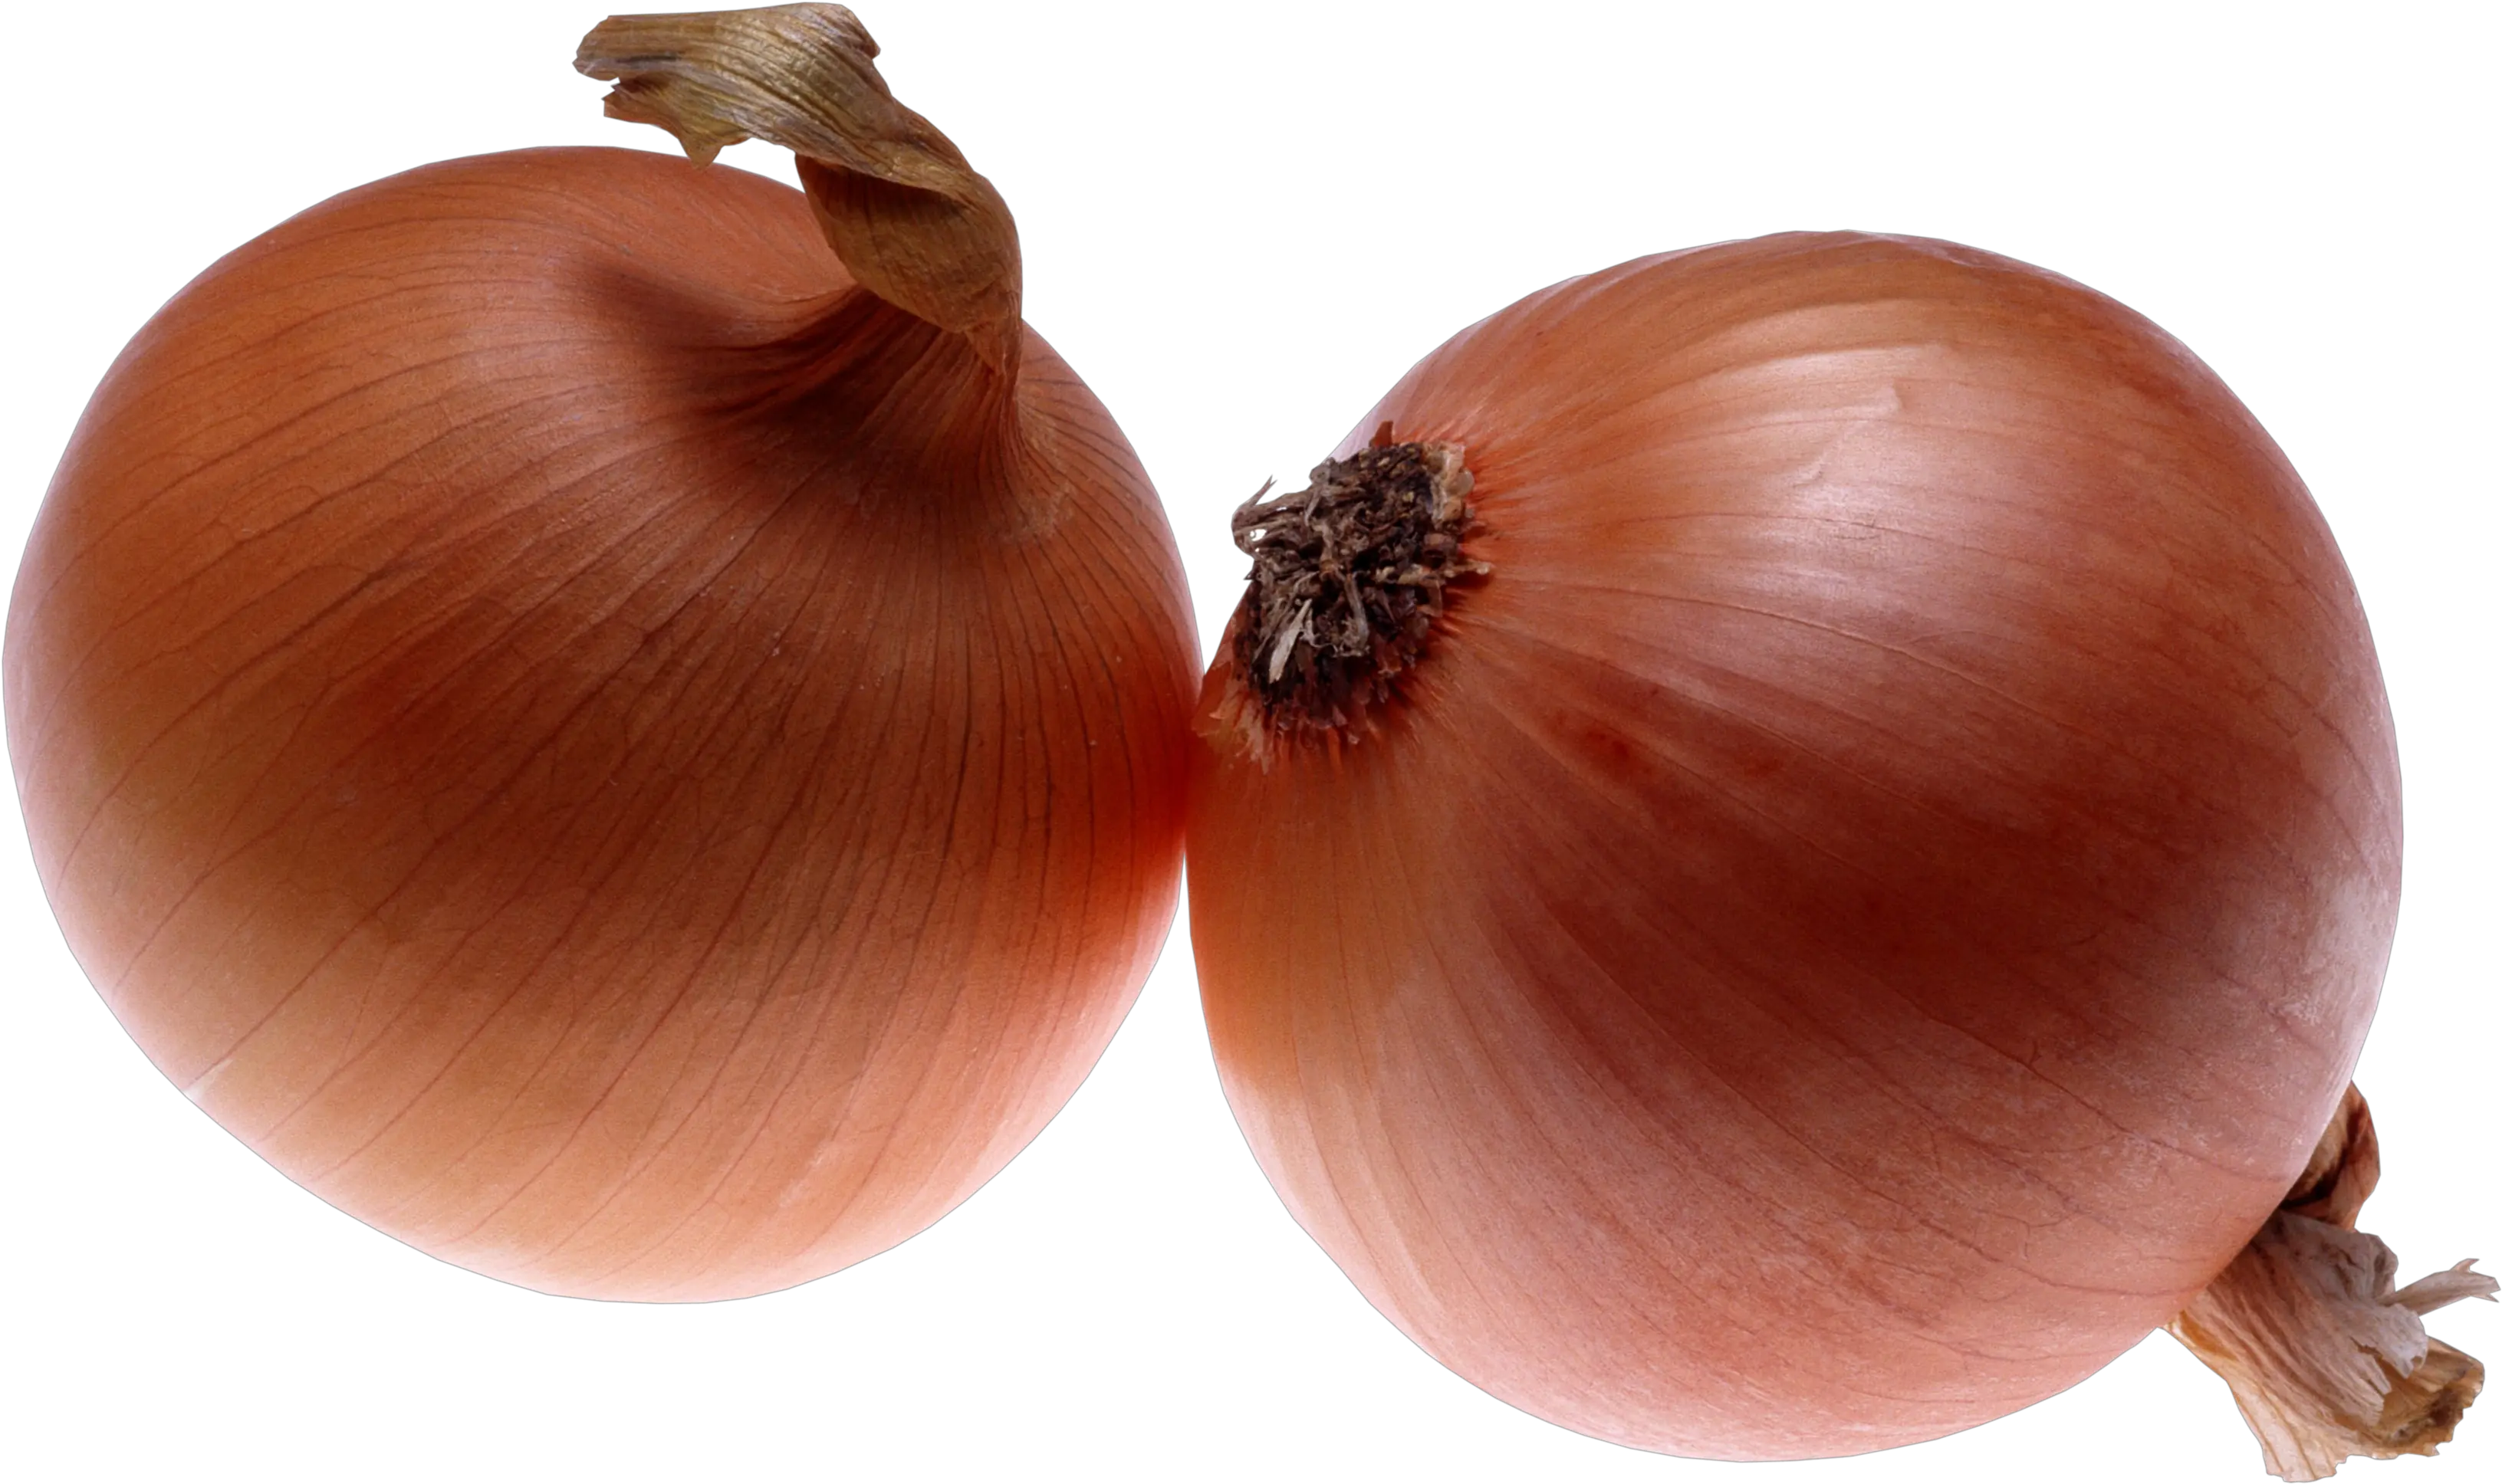 Download Onion Png Image For Free 2 Onions Png Onion Png